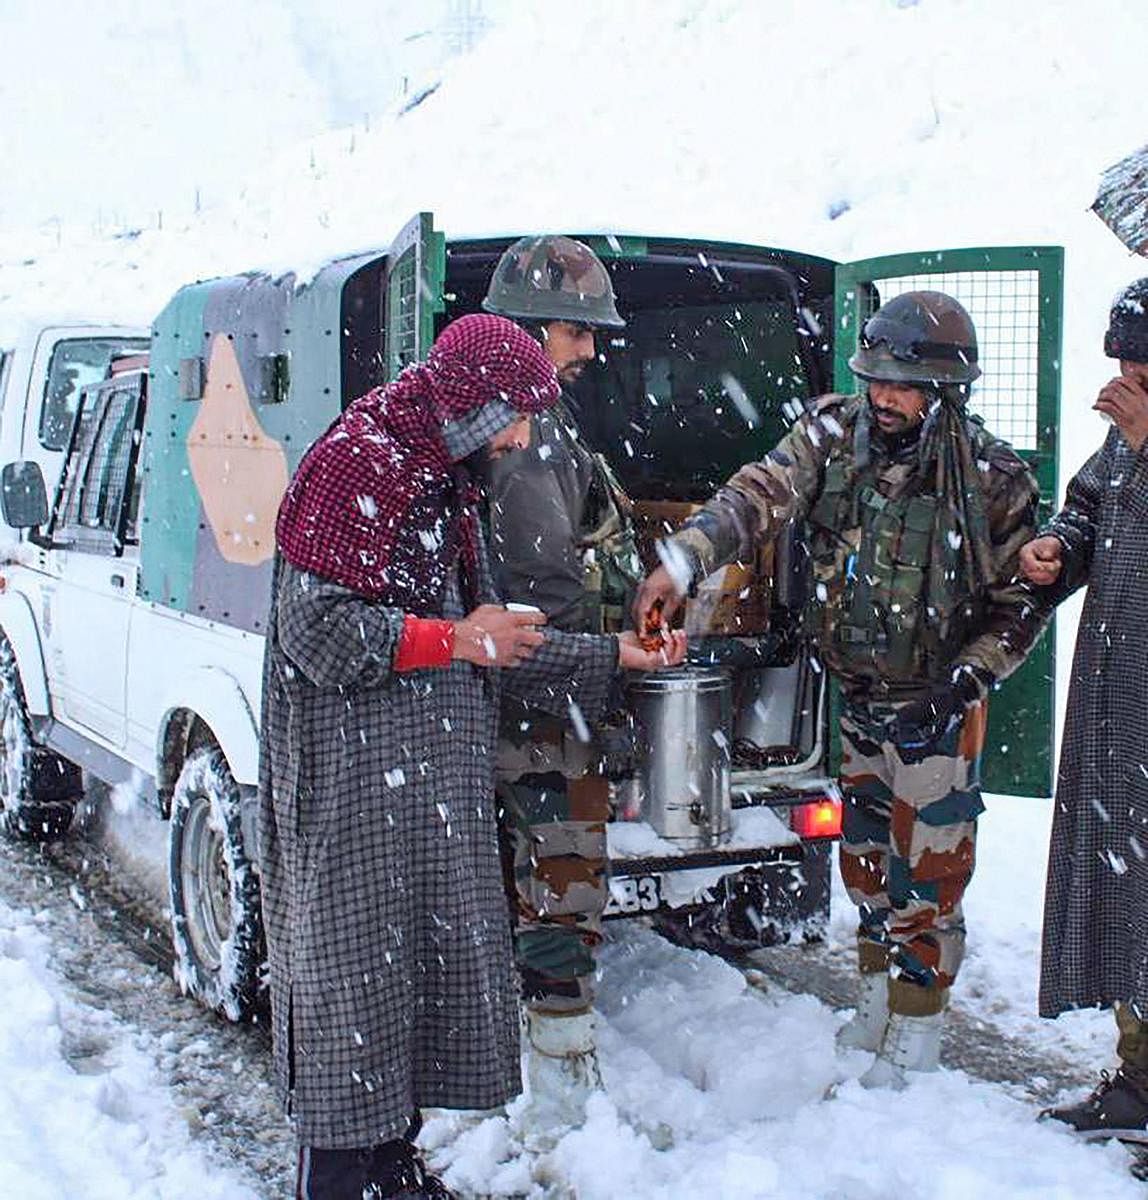 Army personnel during the rescue operation of civilians stranded due to heavy snowfall near Zojila Pass in J&amp;K, on Friday. Approximately 300-350 people, including women and children, were stranded at heights above 11,000 feet and temperatures of minus